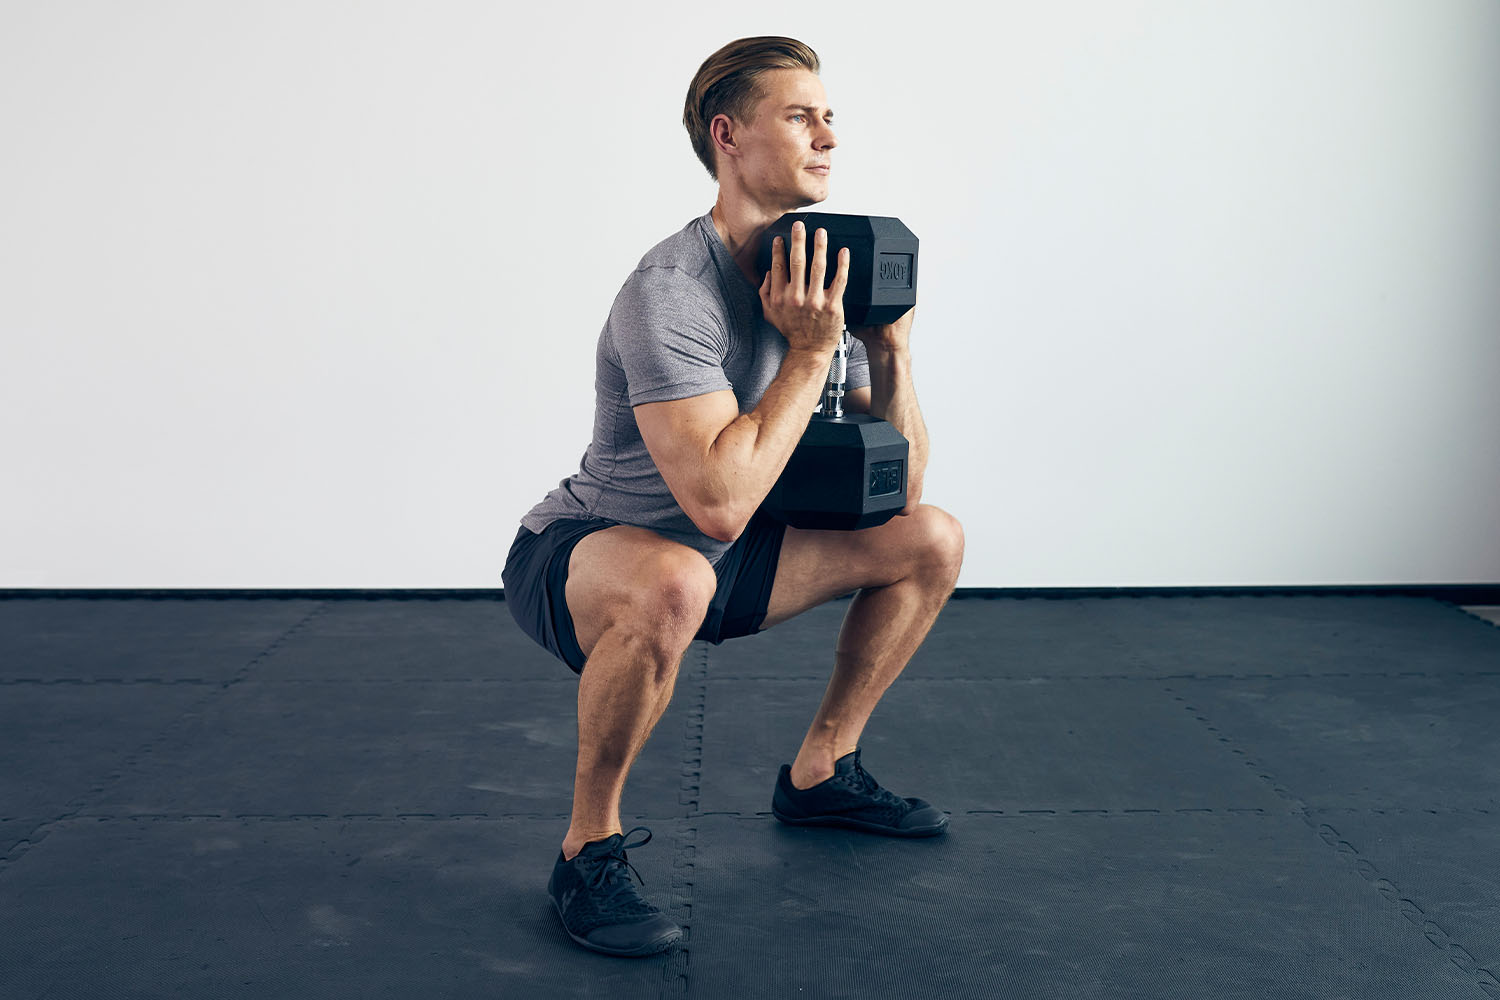 Jack Hanrahan, personal trainer, squatting and holding a dumbell with both hands